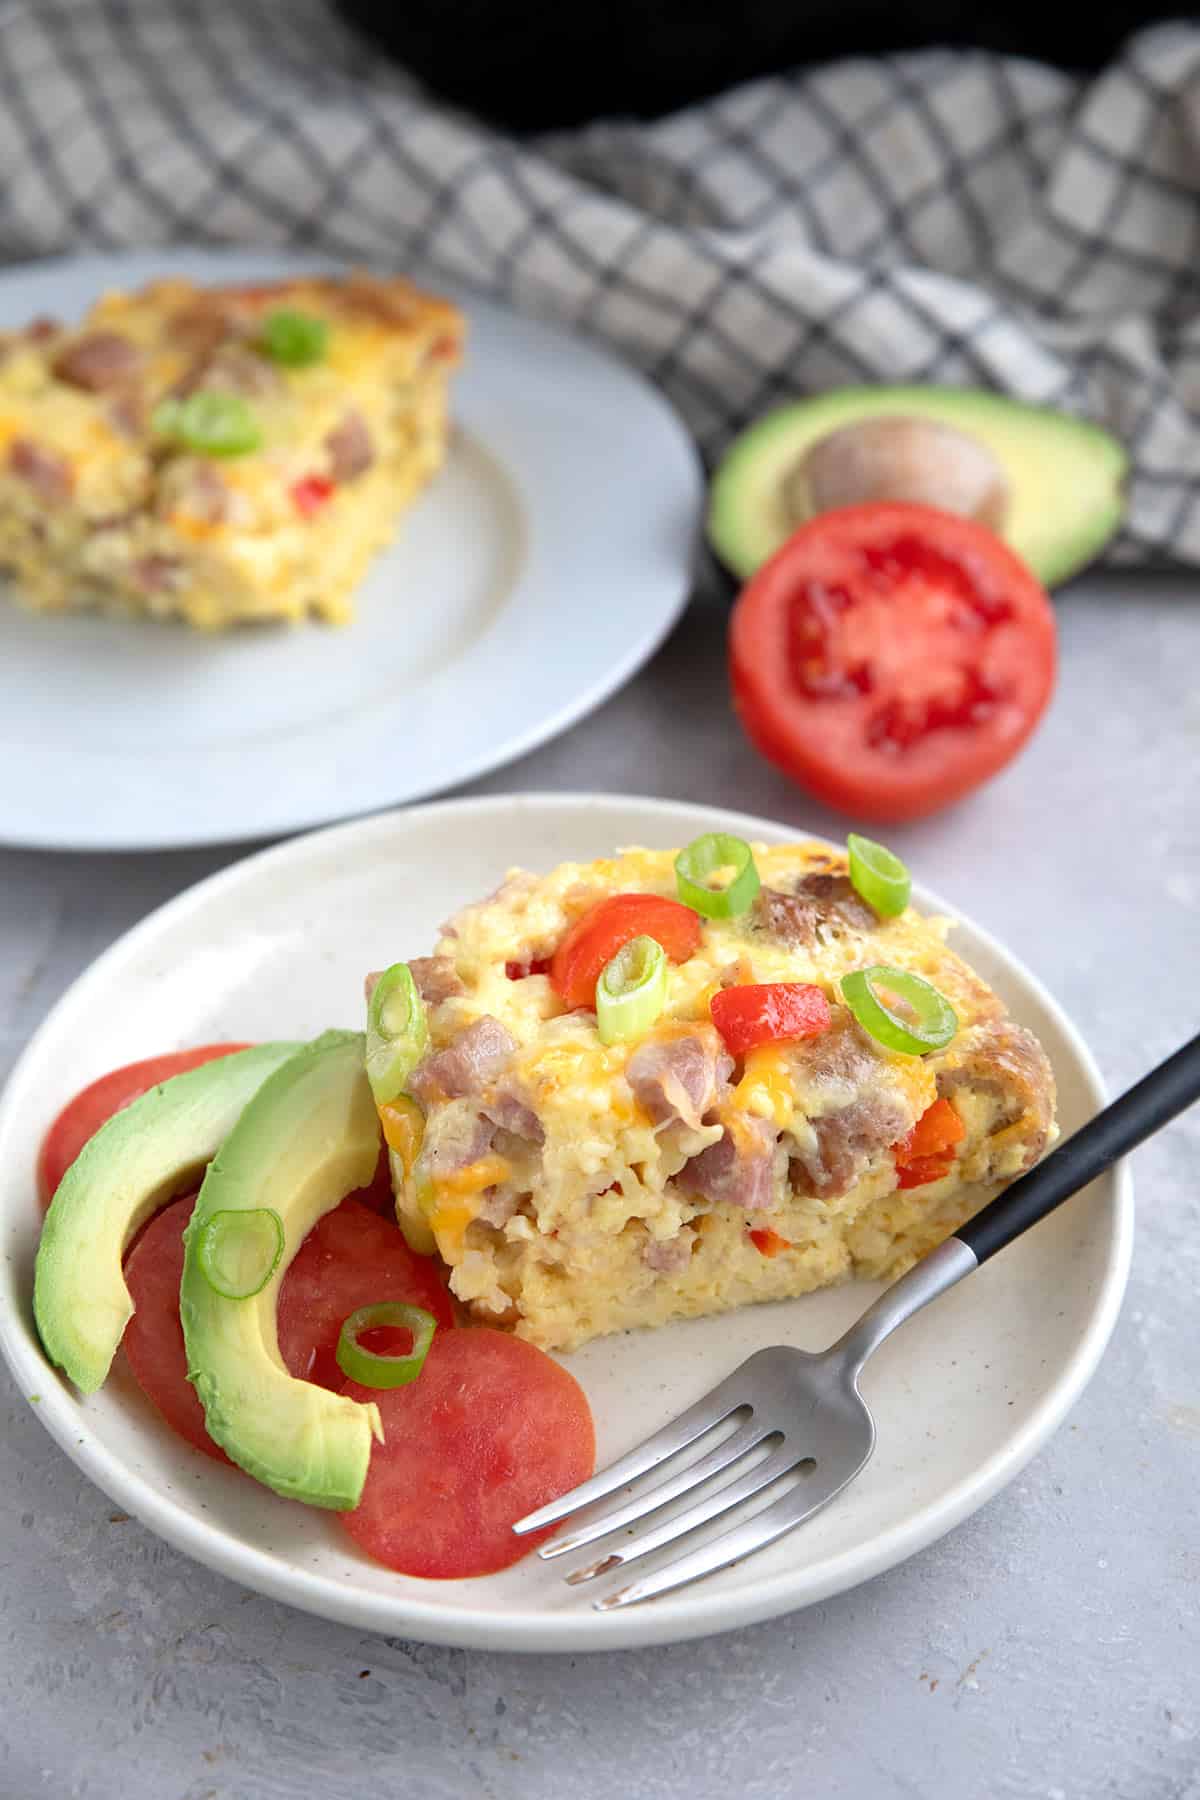 A slice of Slow Cooker Breakfast Casserole on a white plate with some tomato and avocado.